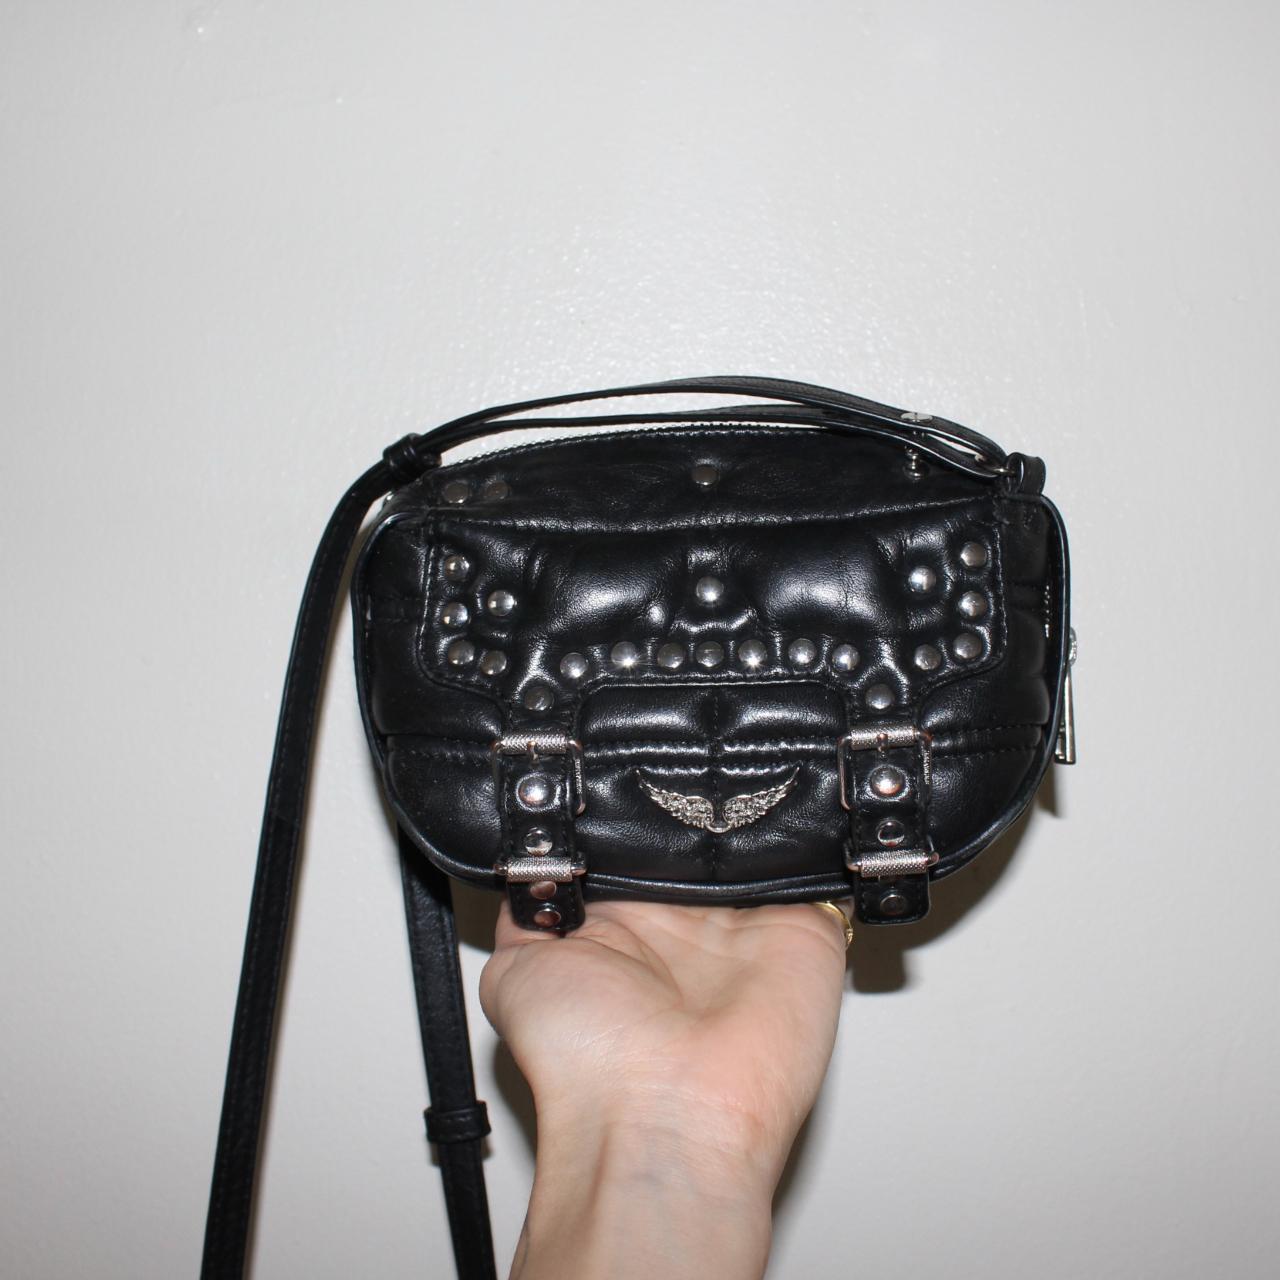 Zadig & Voltaire cross body black leather bag with - Depop